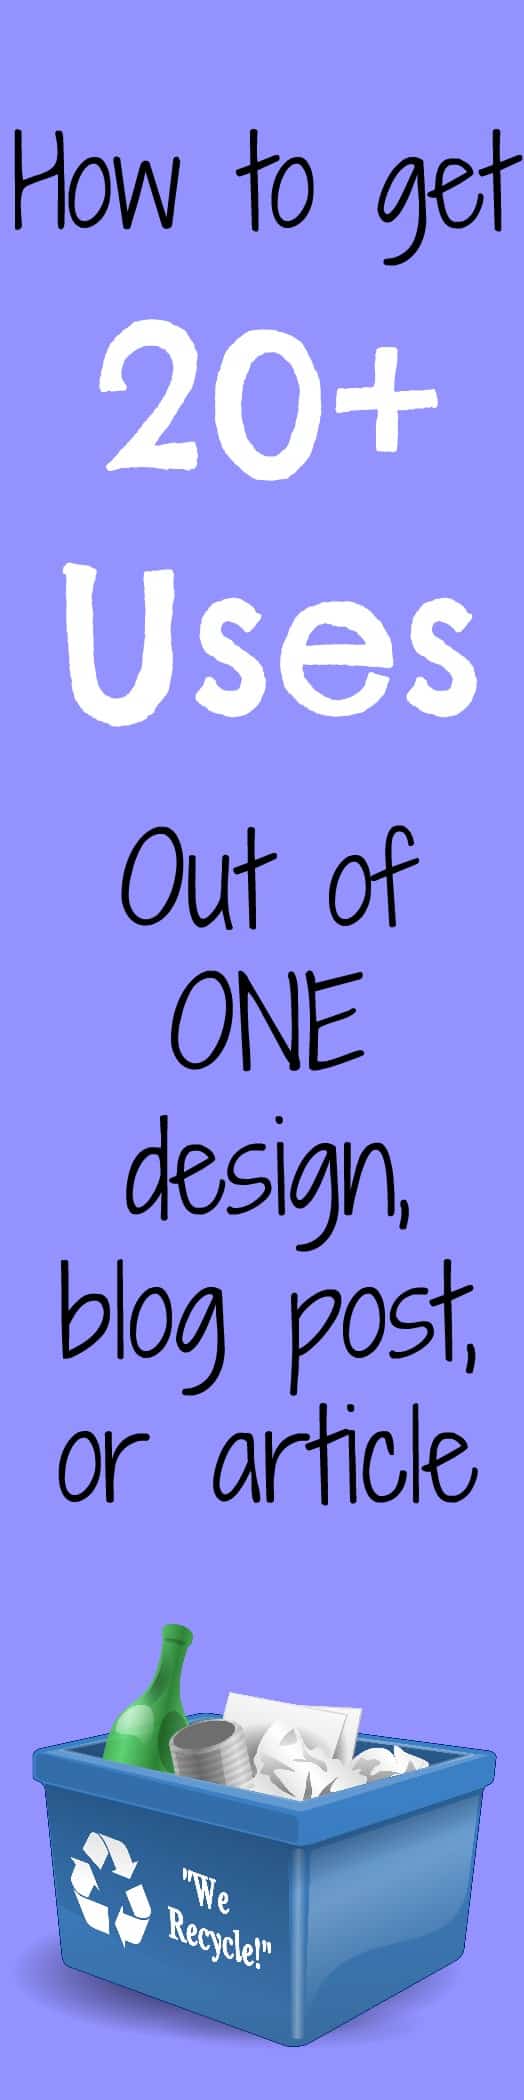 Reuse blog posts, designs, and articles - great tips here!